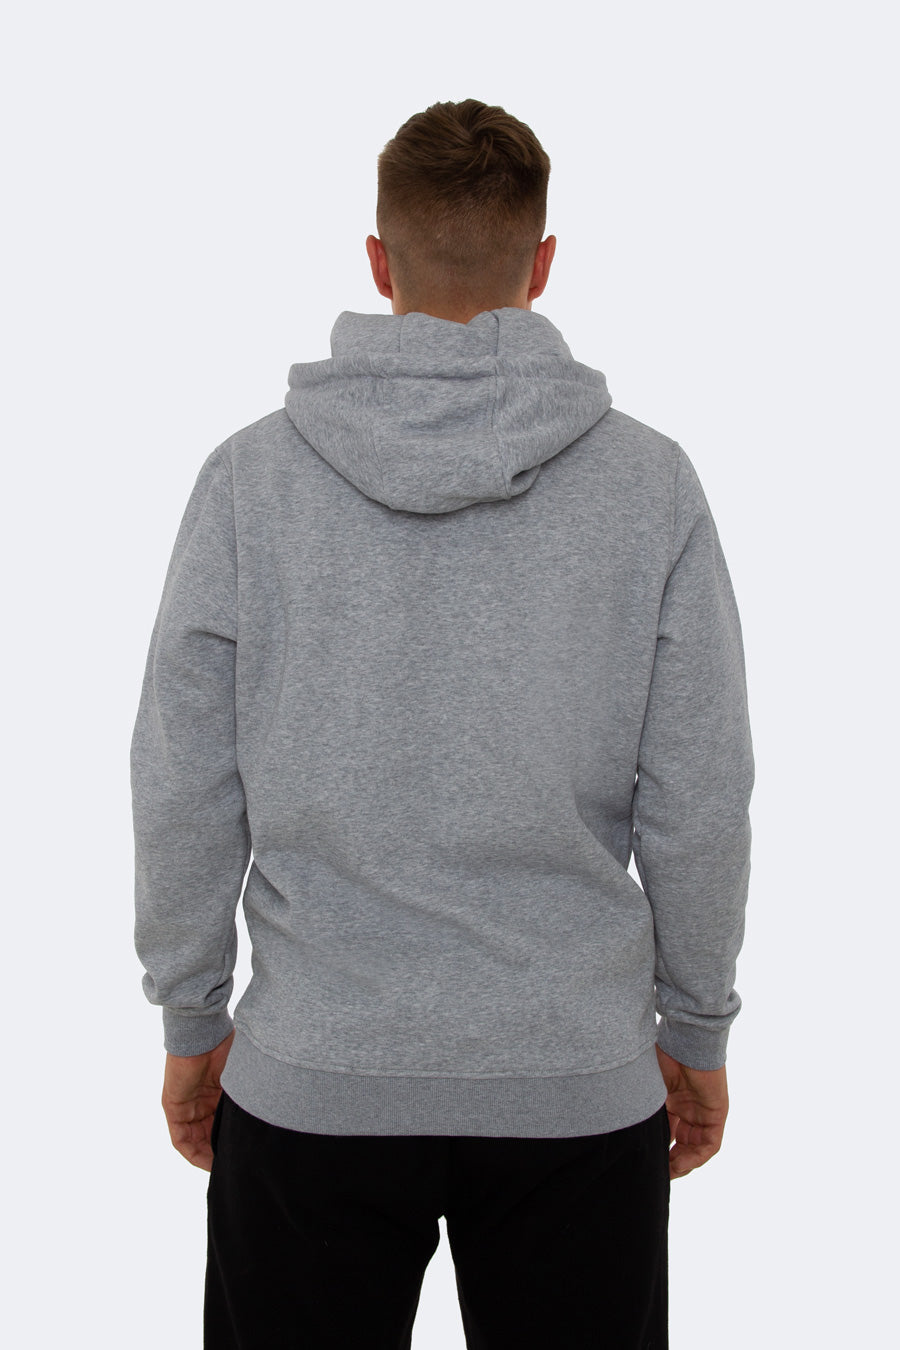 Transire Hooded Sweater